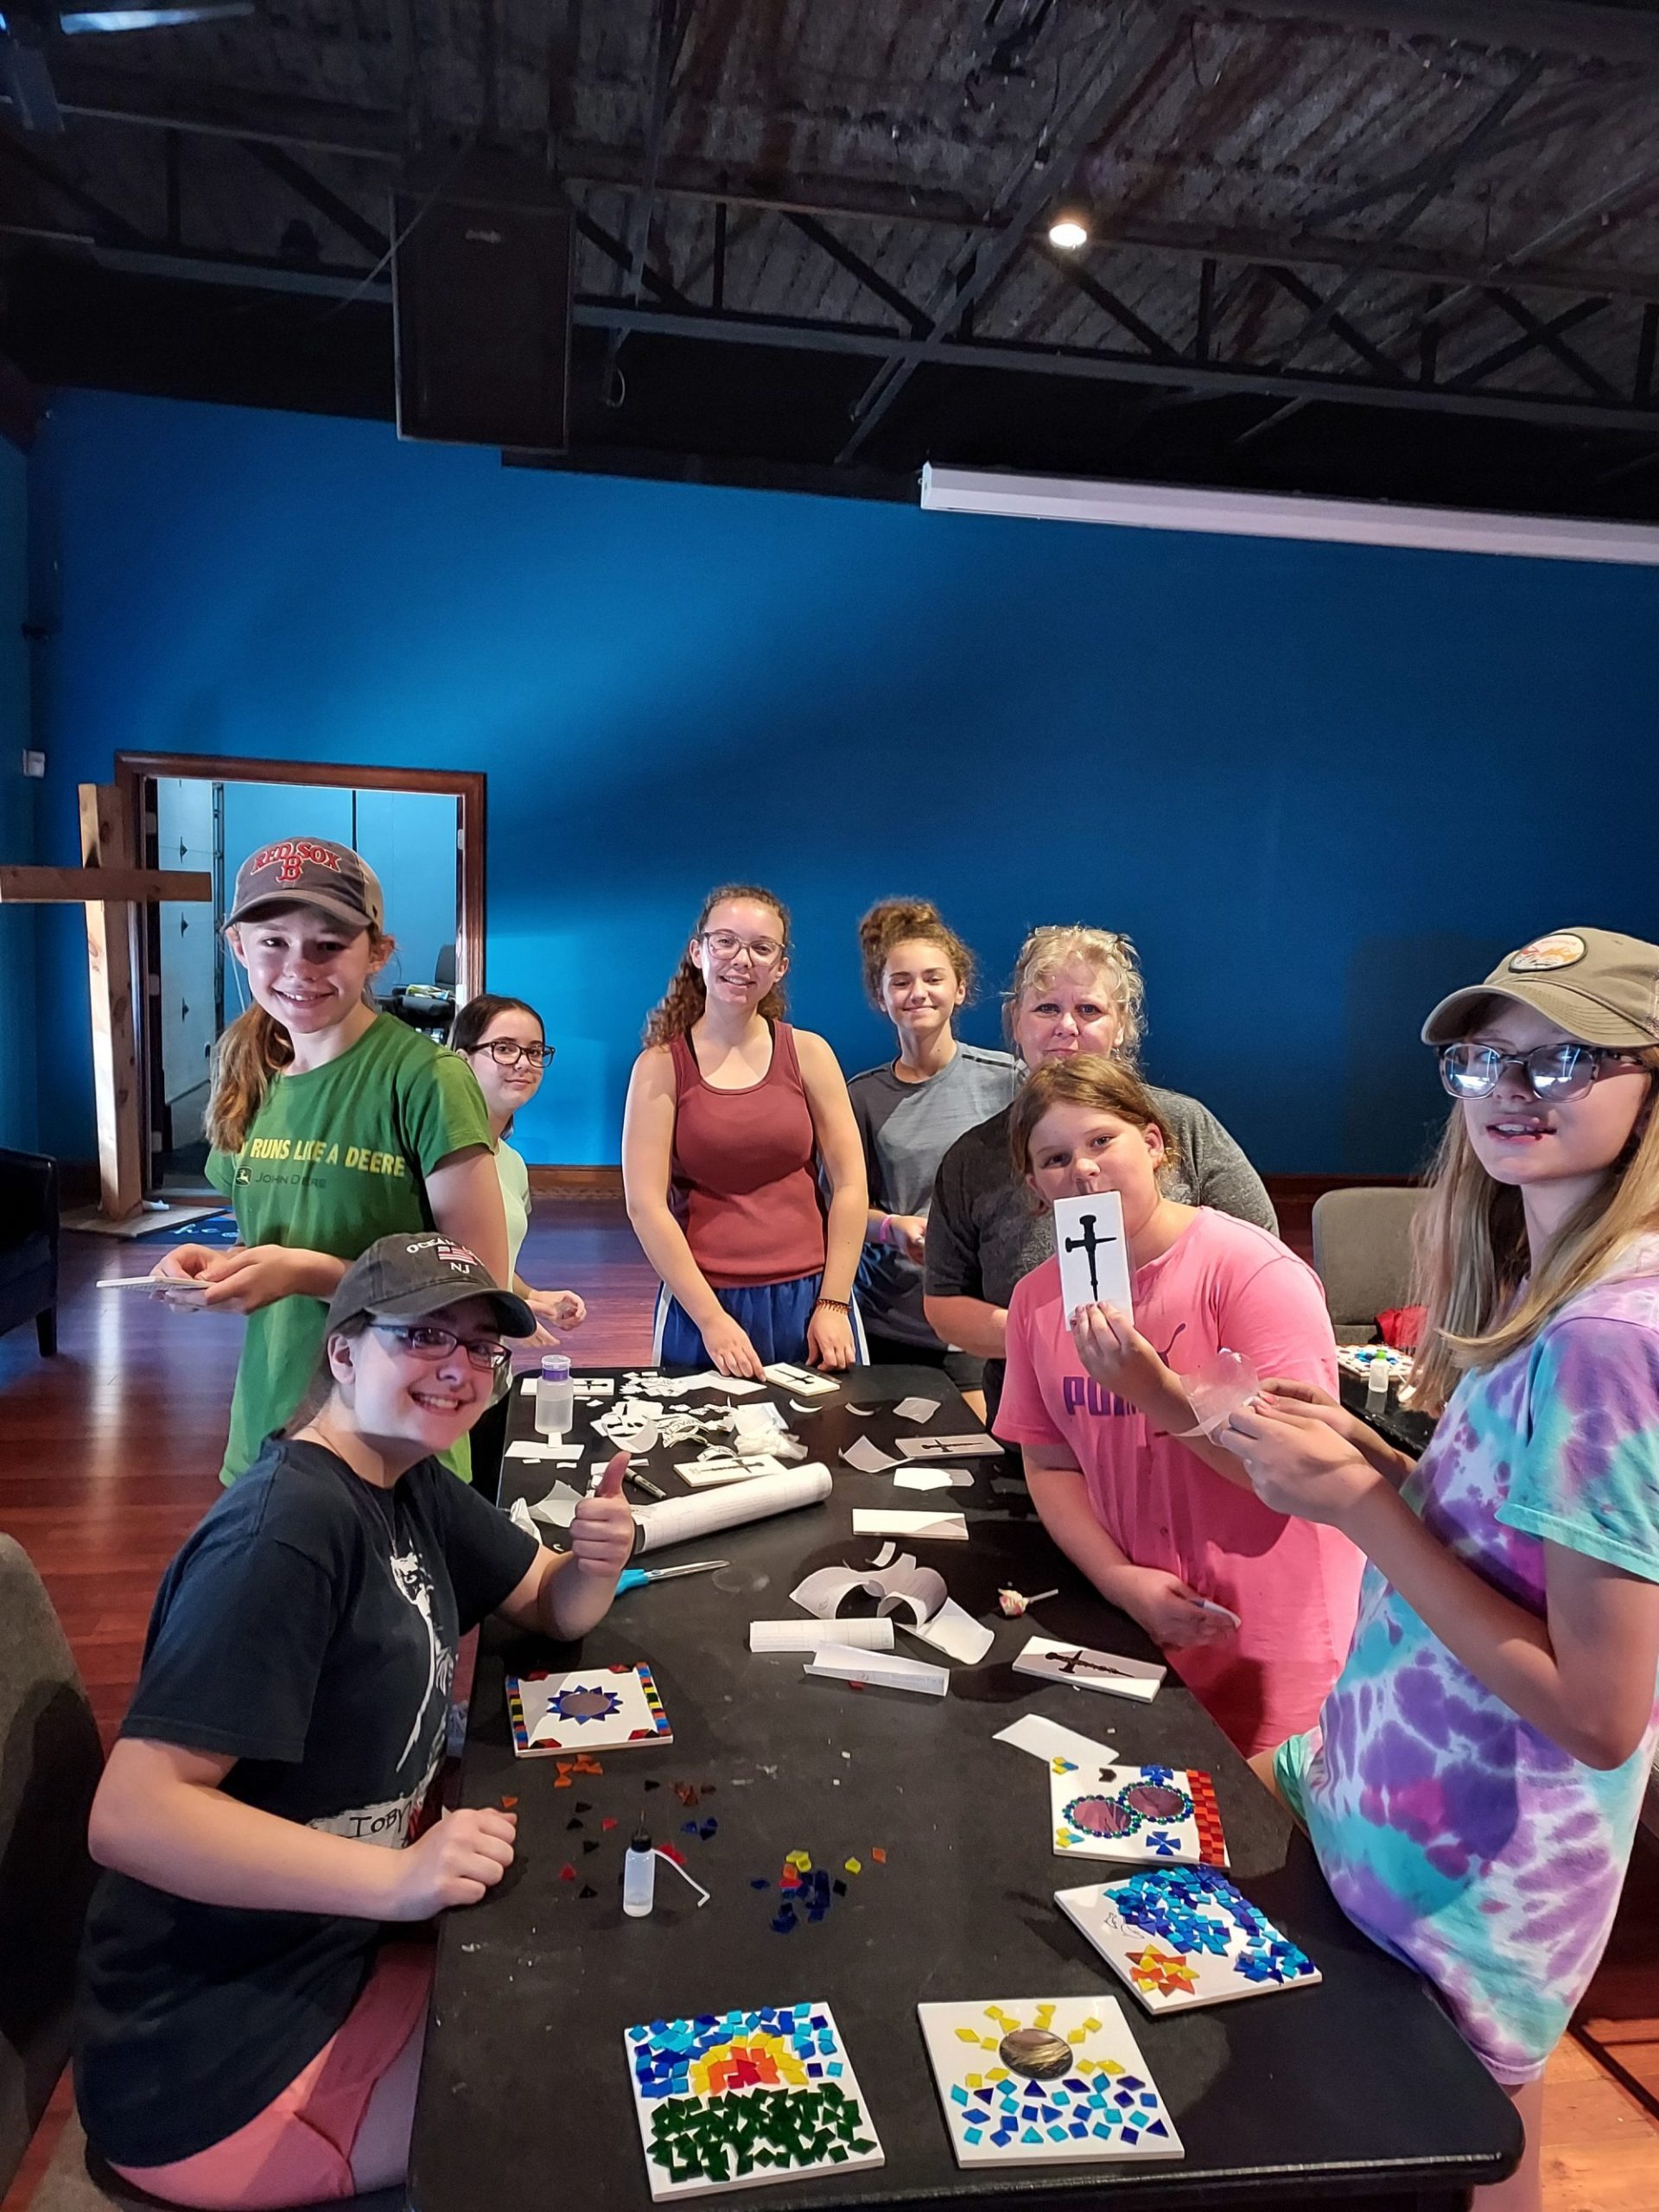 some teens working on arts and crafts at a table in the journey